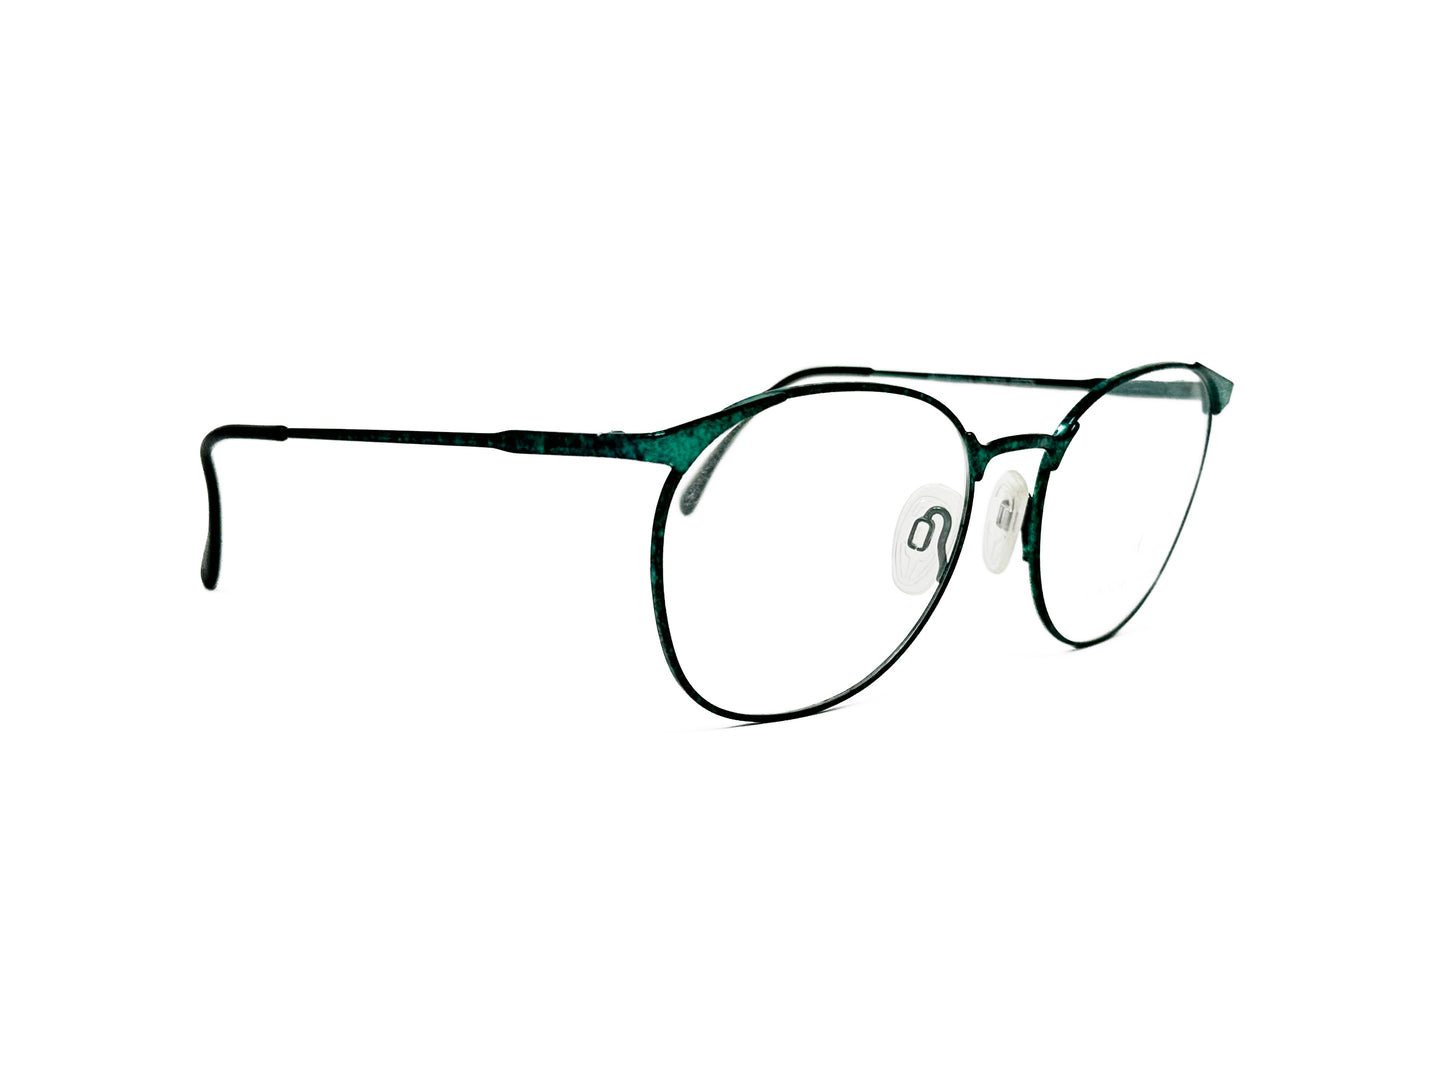 Cadore Moda round metal optical frame with wing tips. Model: Paris. Color: Demi Green. Side view.